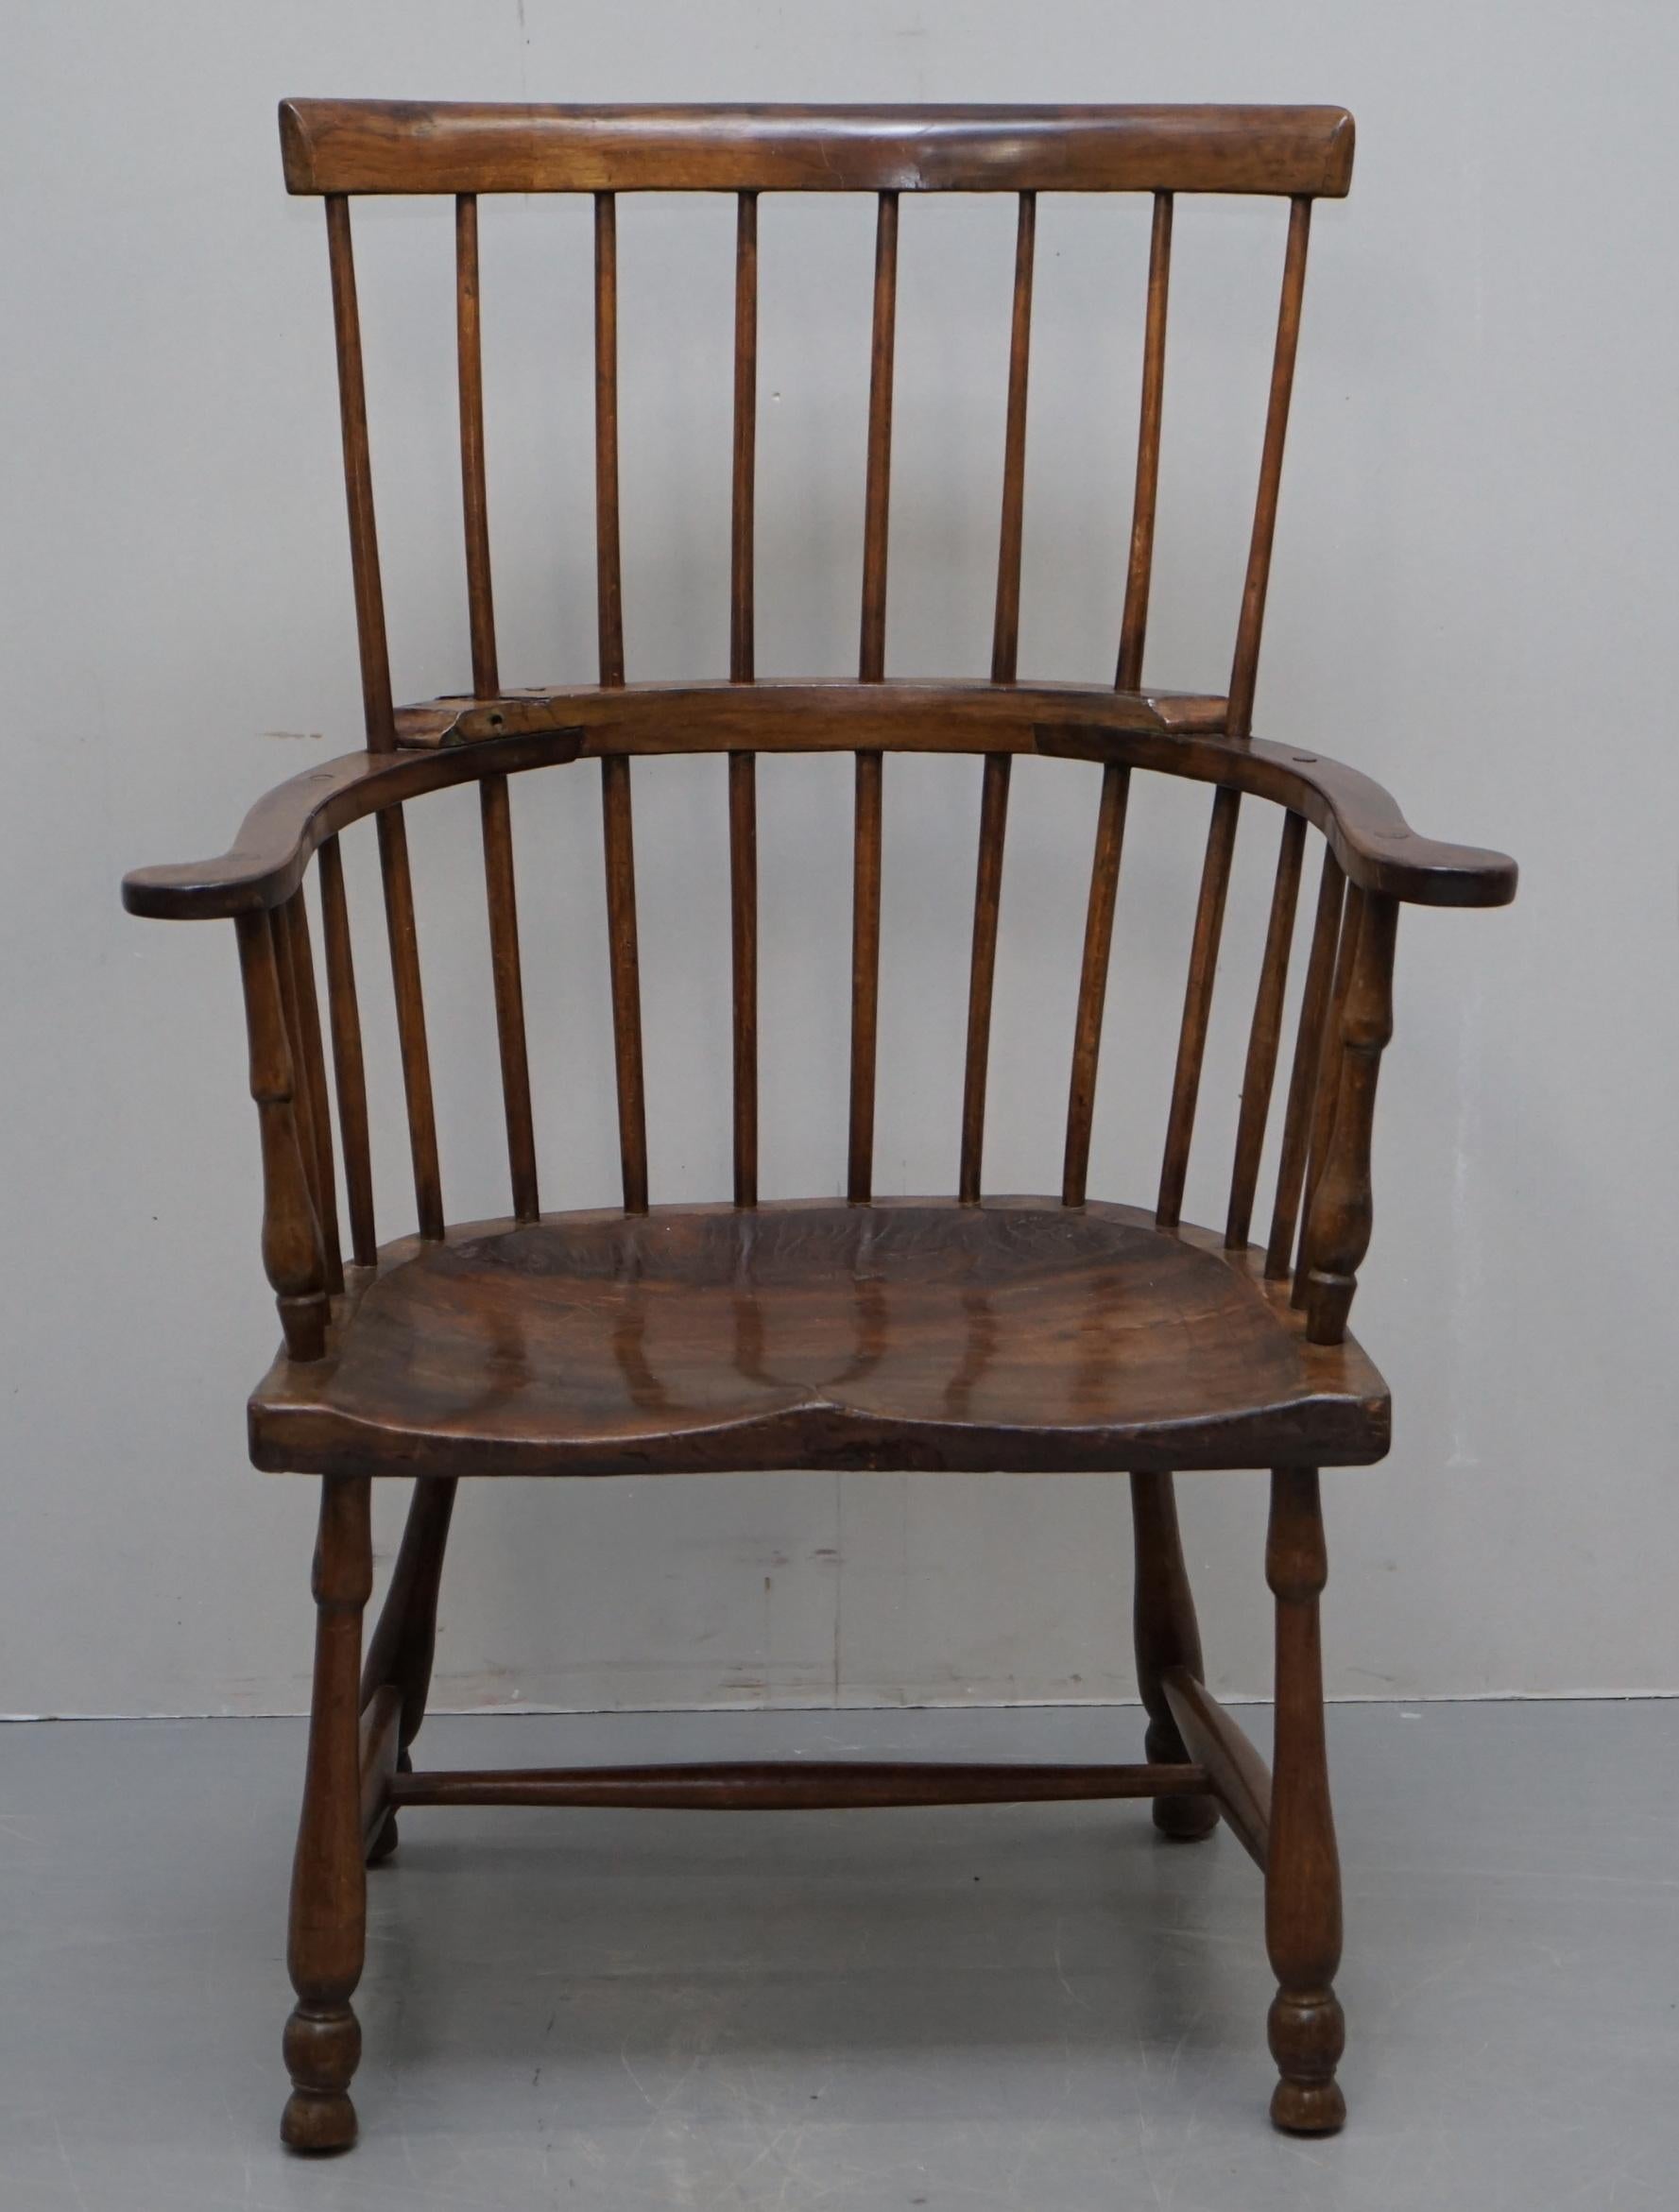 We are delighted to offer for sale this stunning 19th century elm comb back Windsor armchair, circa 1840

A highly coveted, well made and decorative armchair, in the traditional elm, this is an comb back version which is highly collectable and